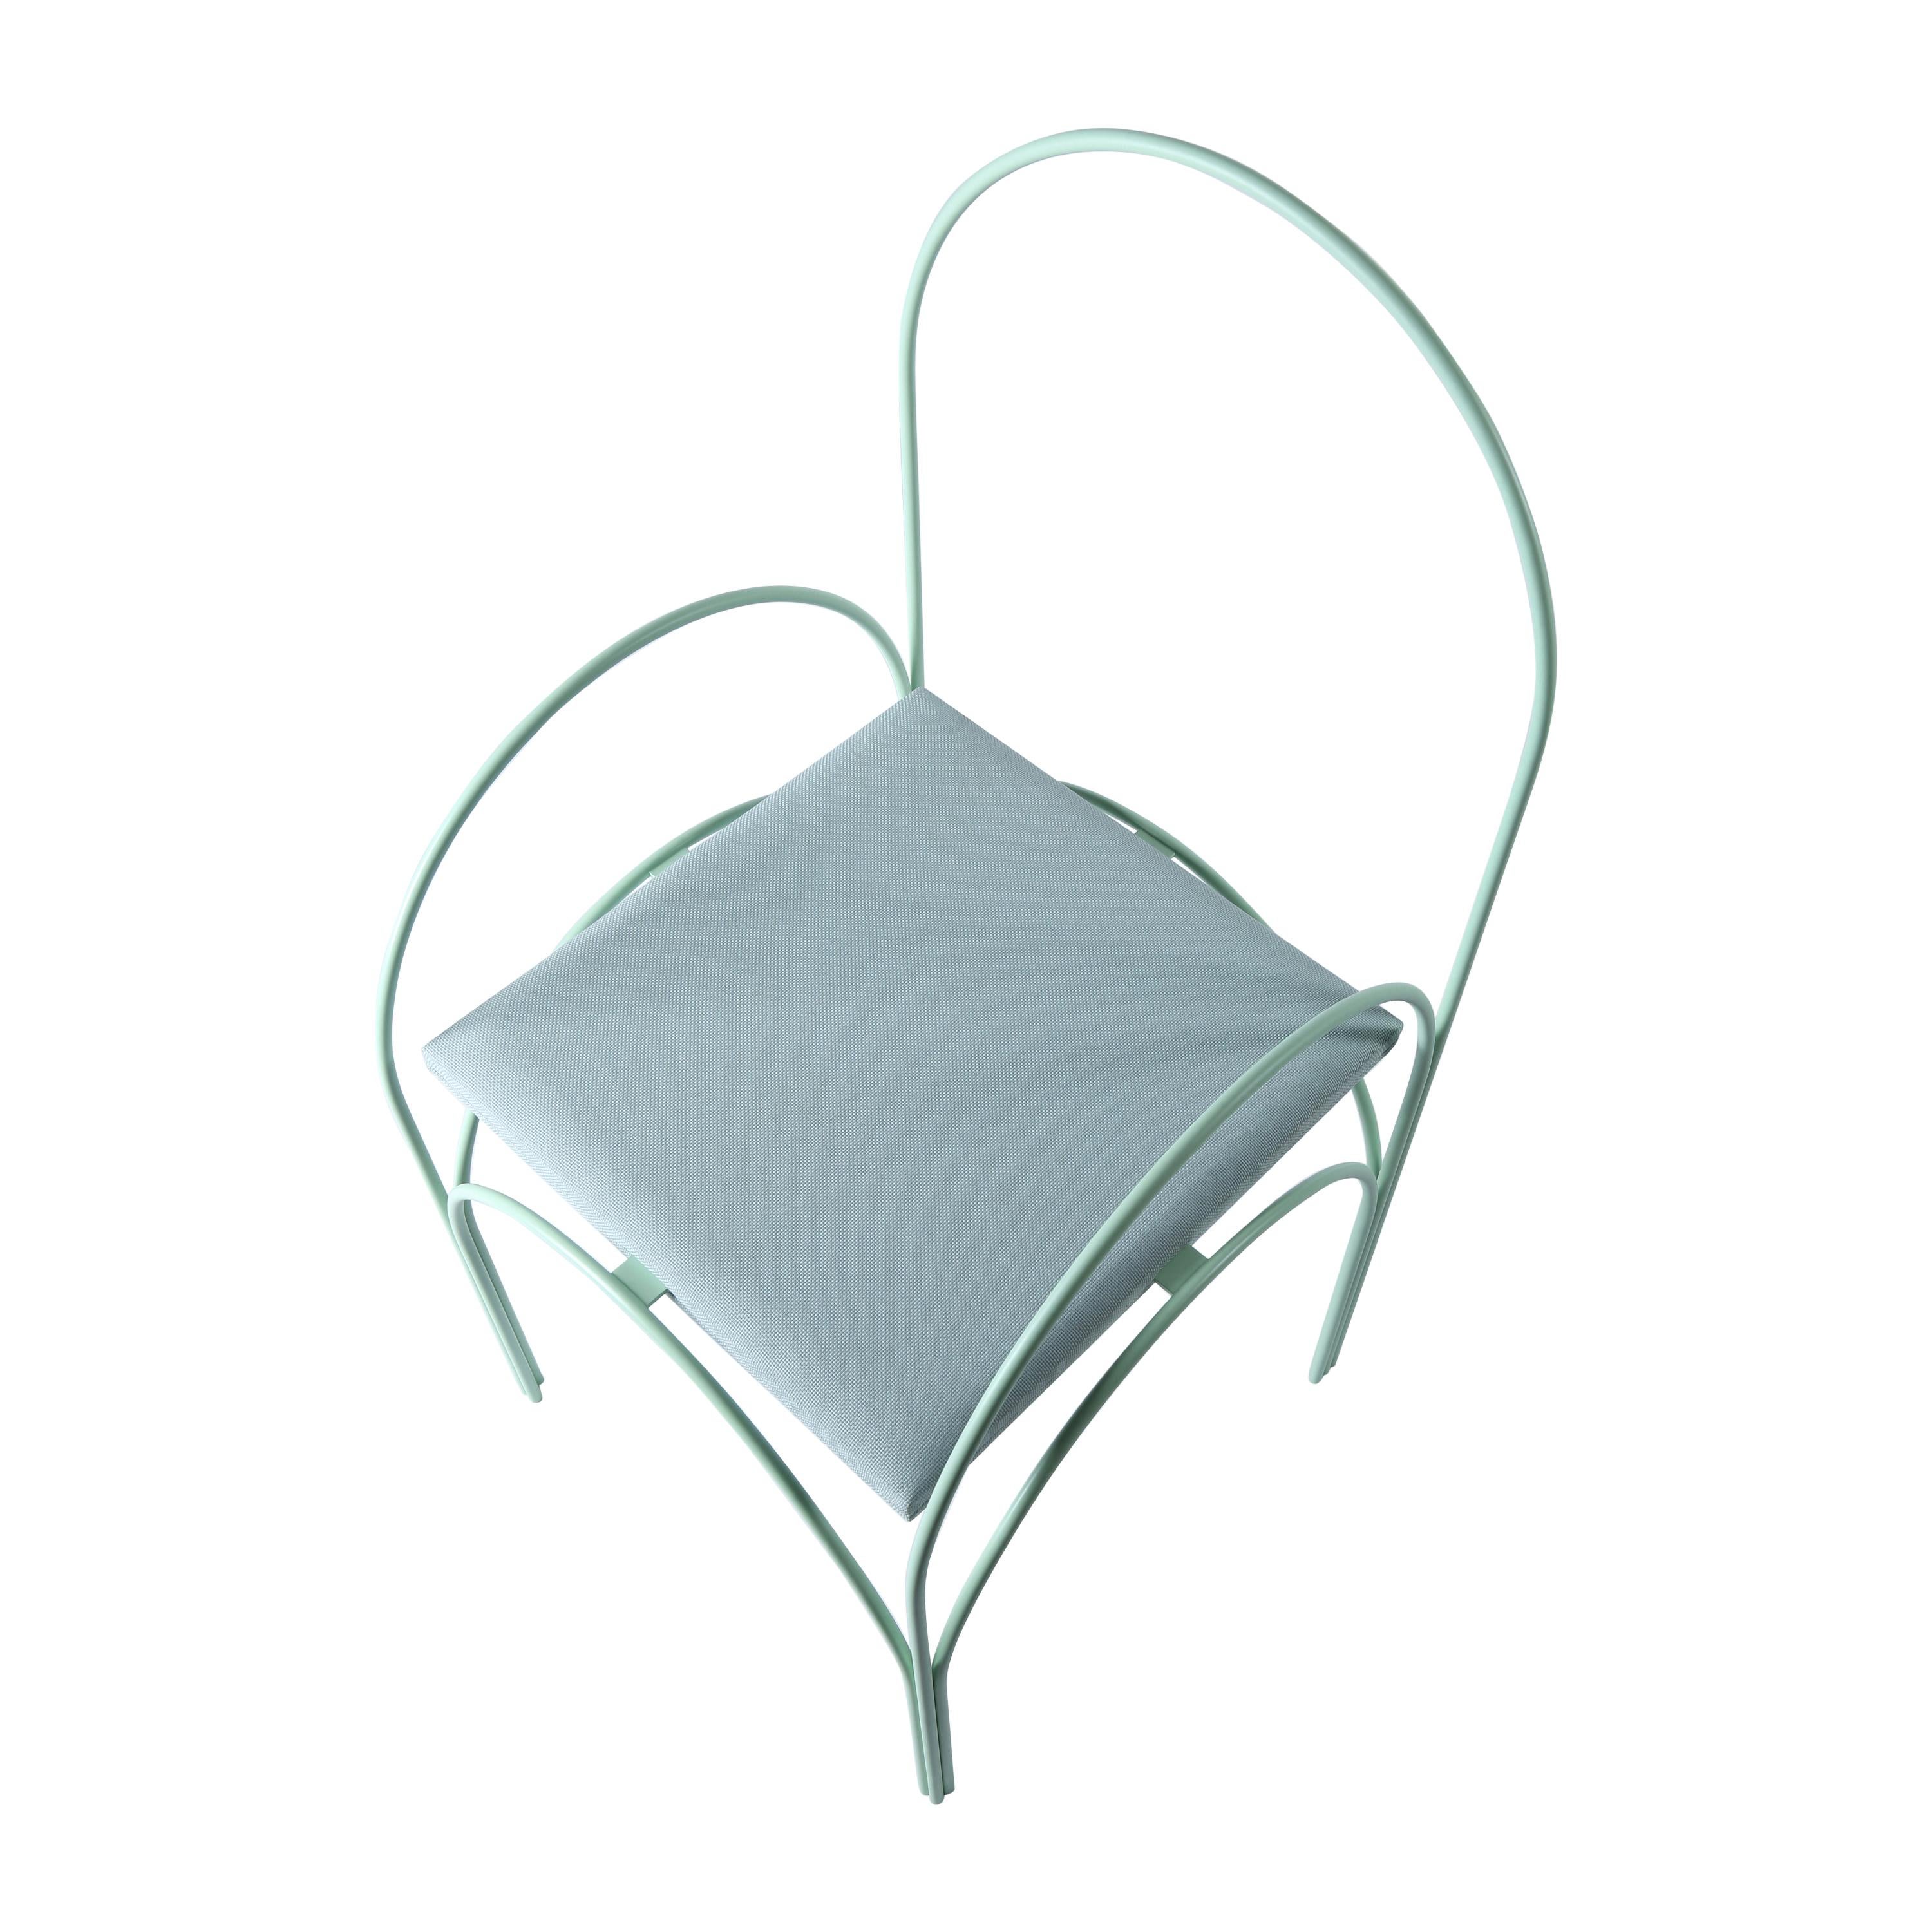 Hawa Beirut Naked Chair by Richard Yasmine For Sale